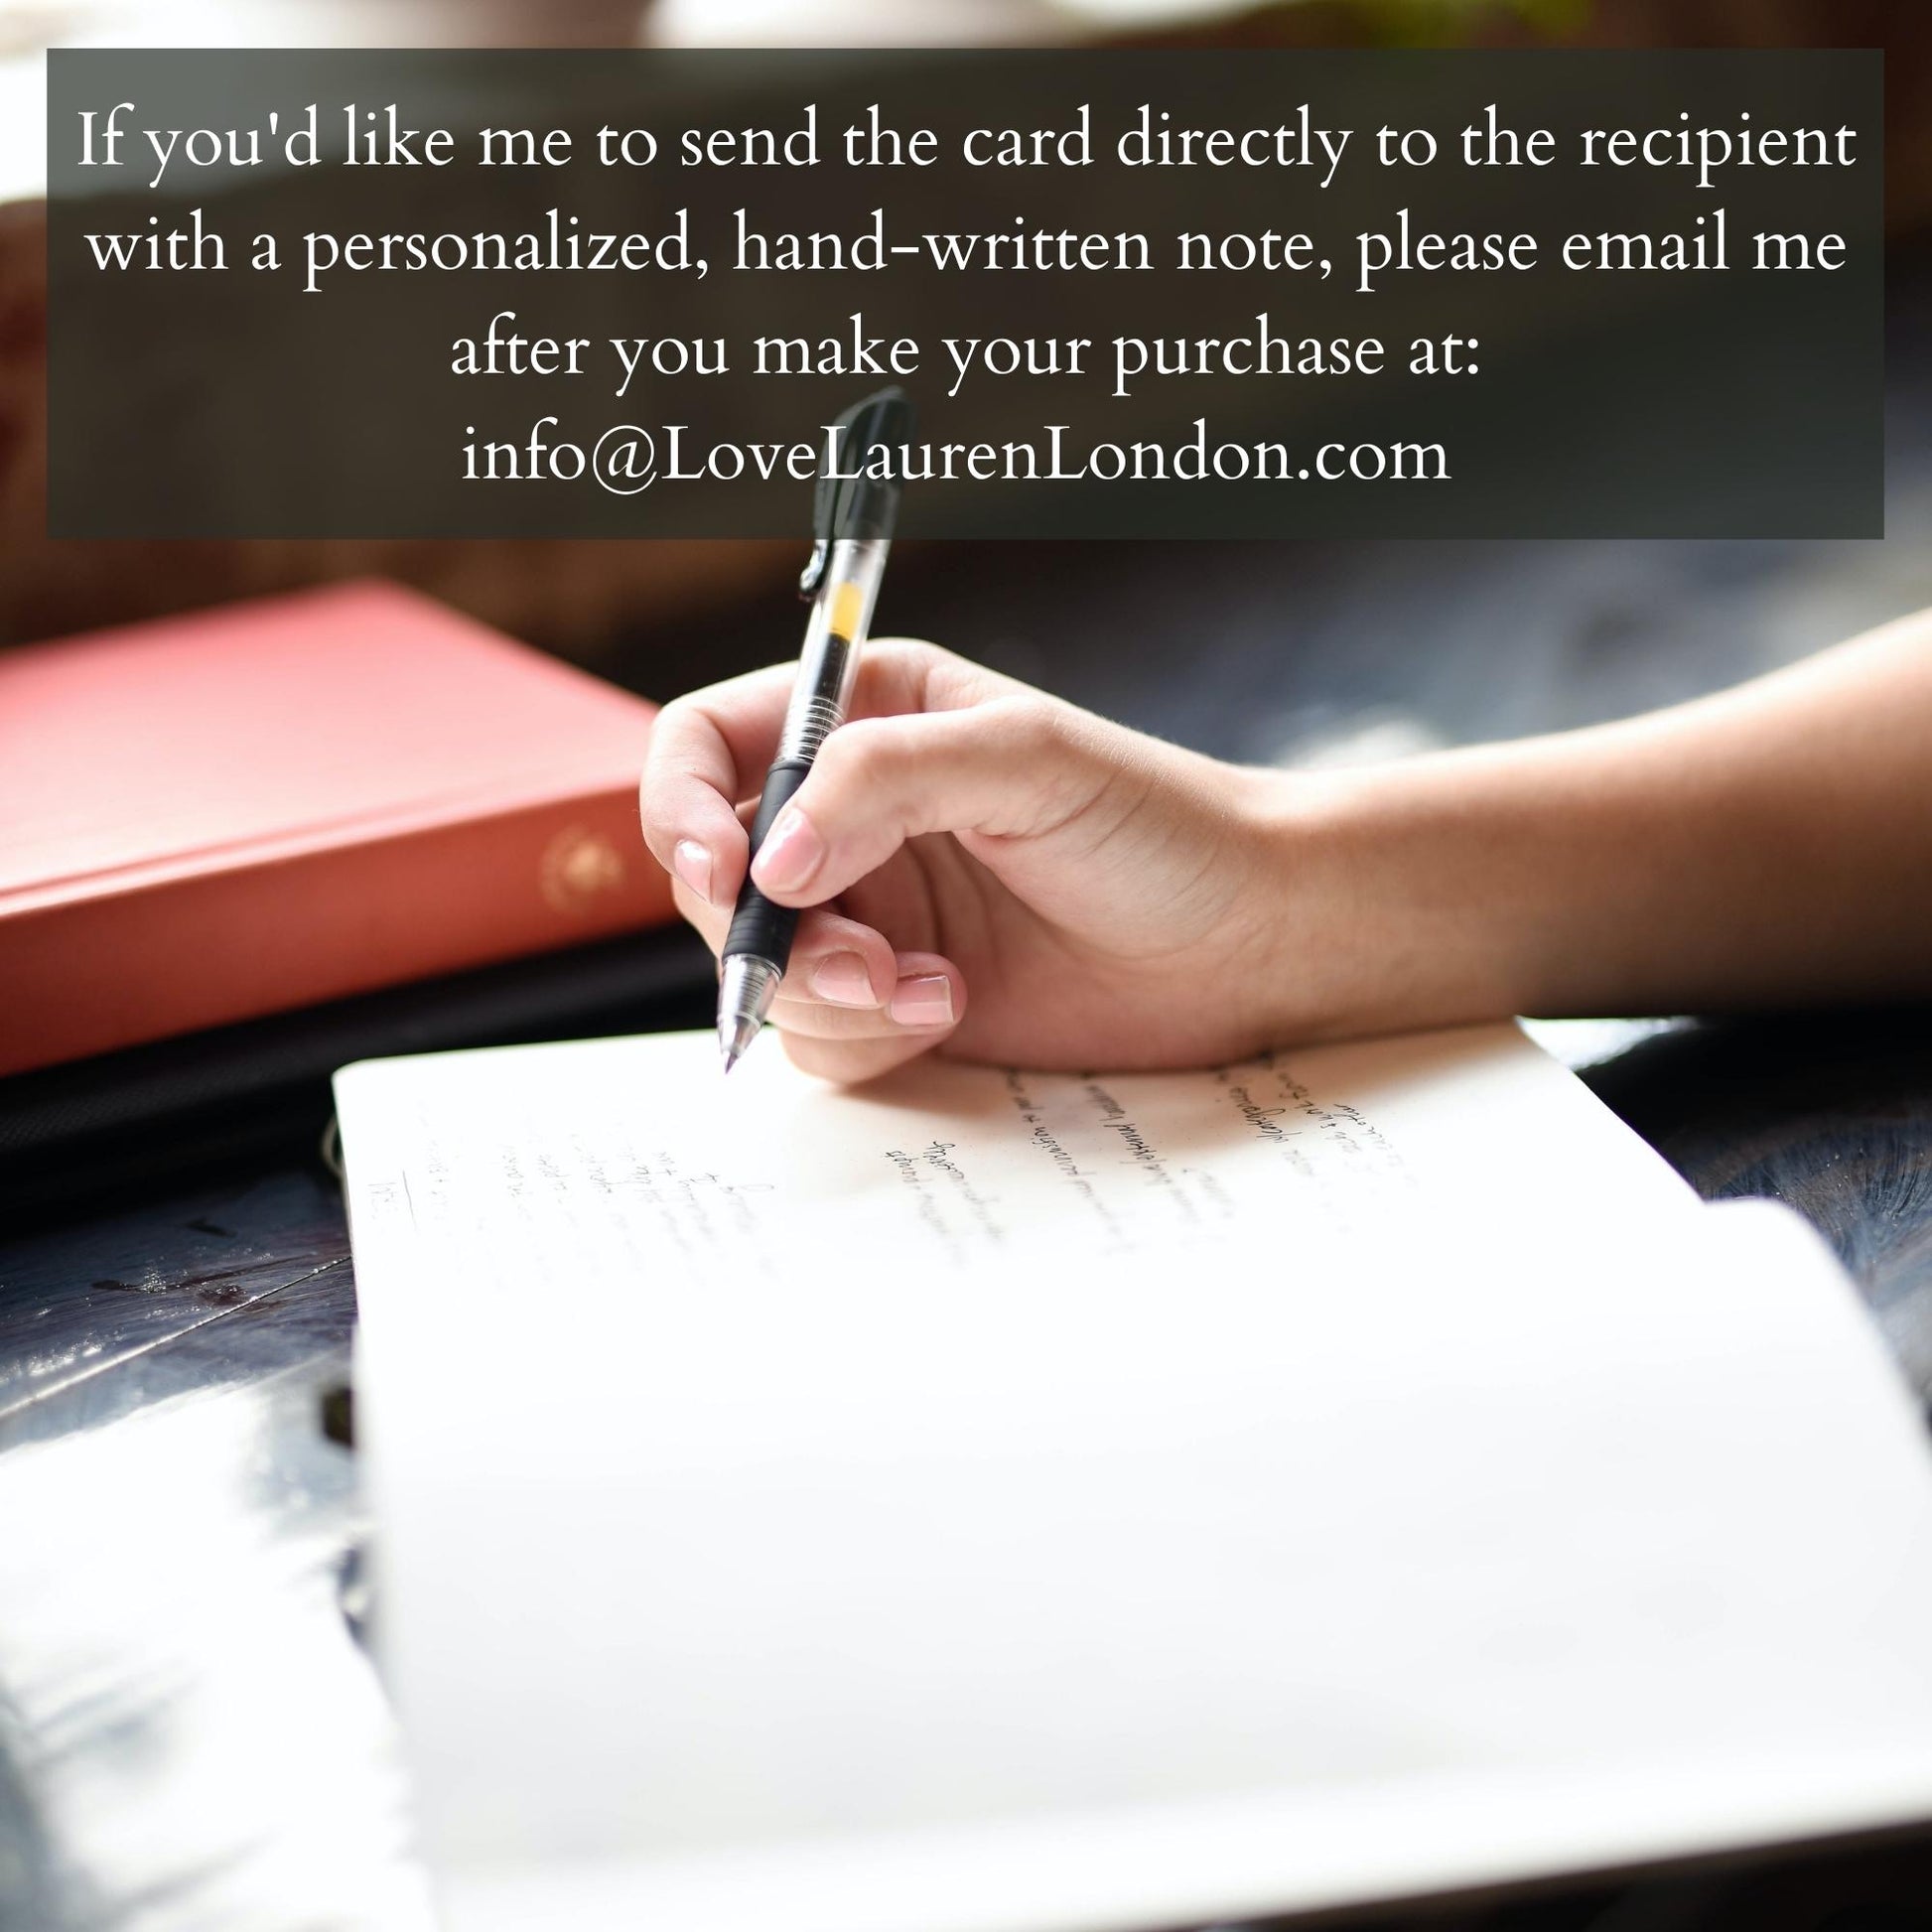 I will hand-write a note for you at no additional fee and mail it directly to the recipient